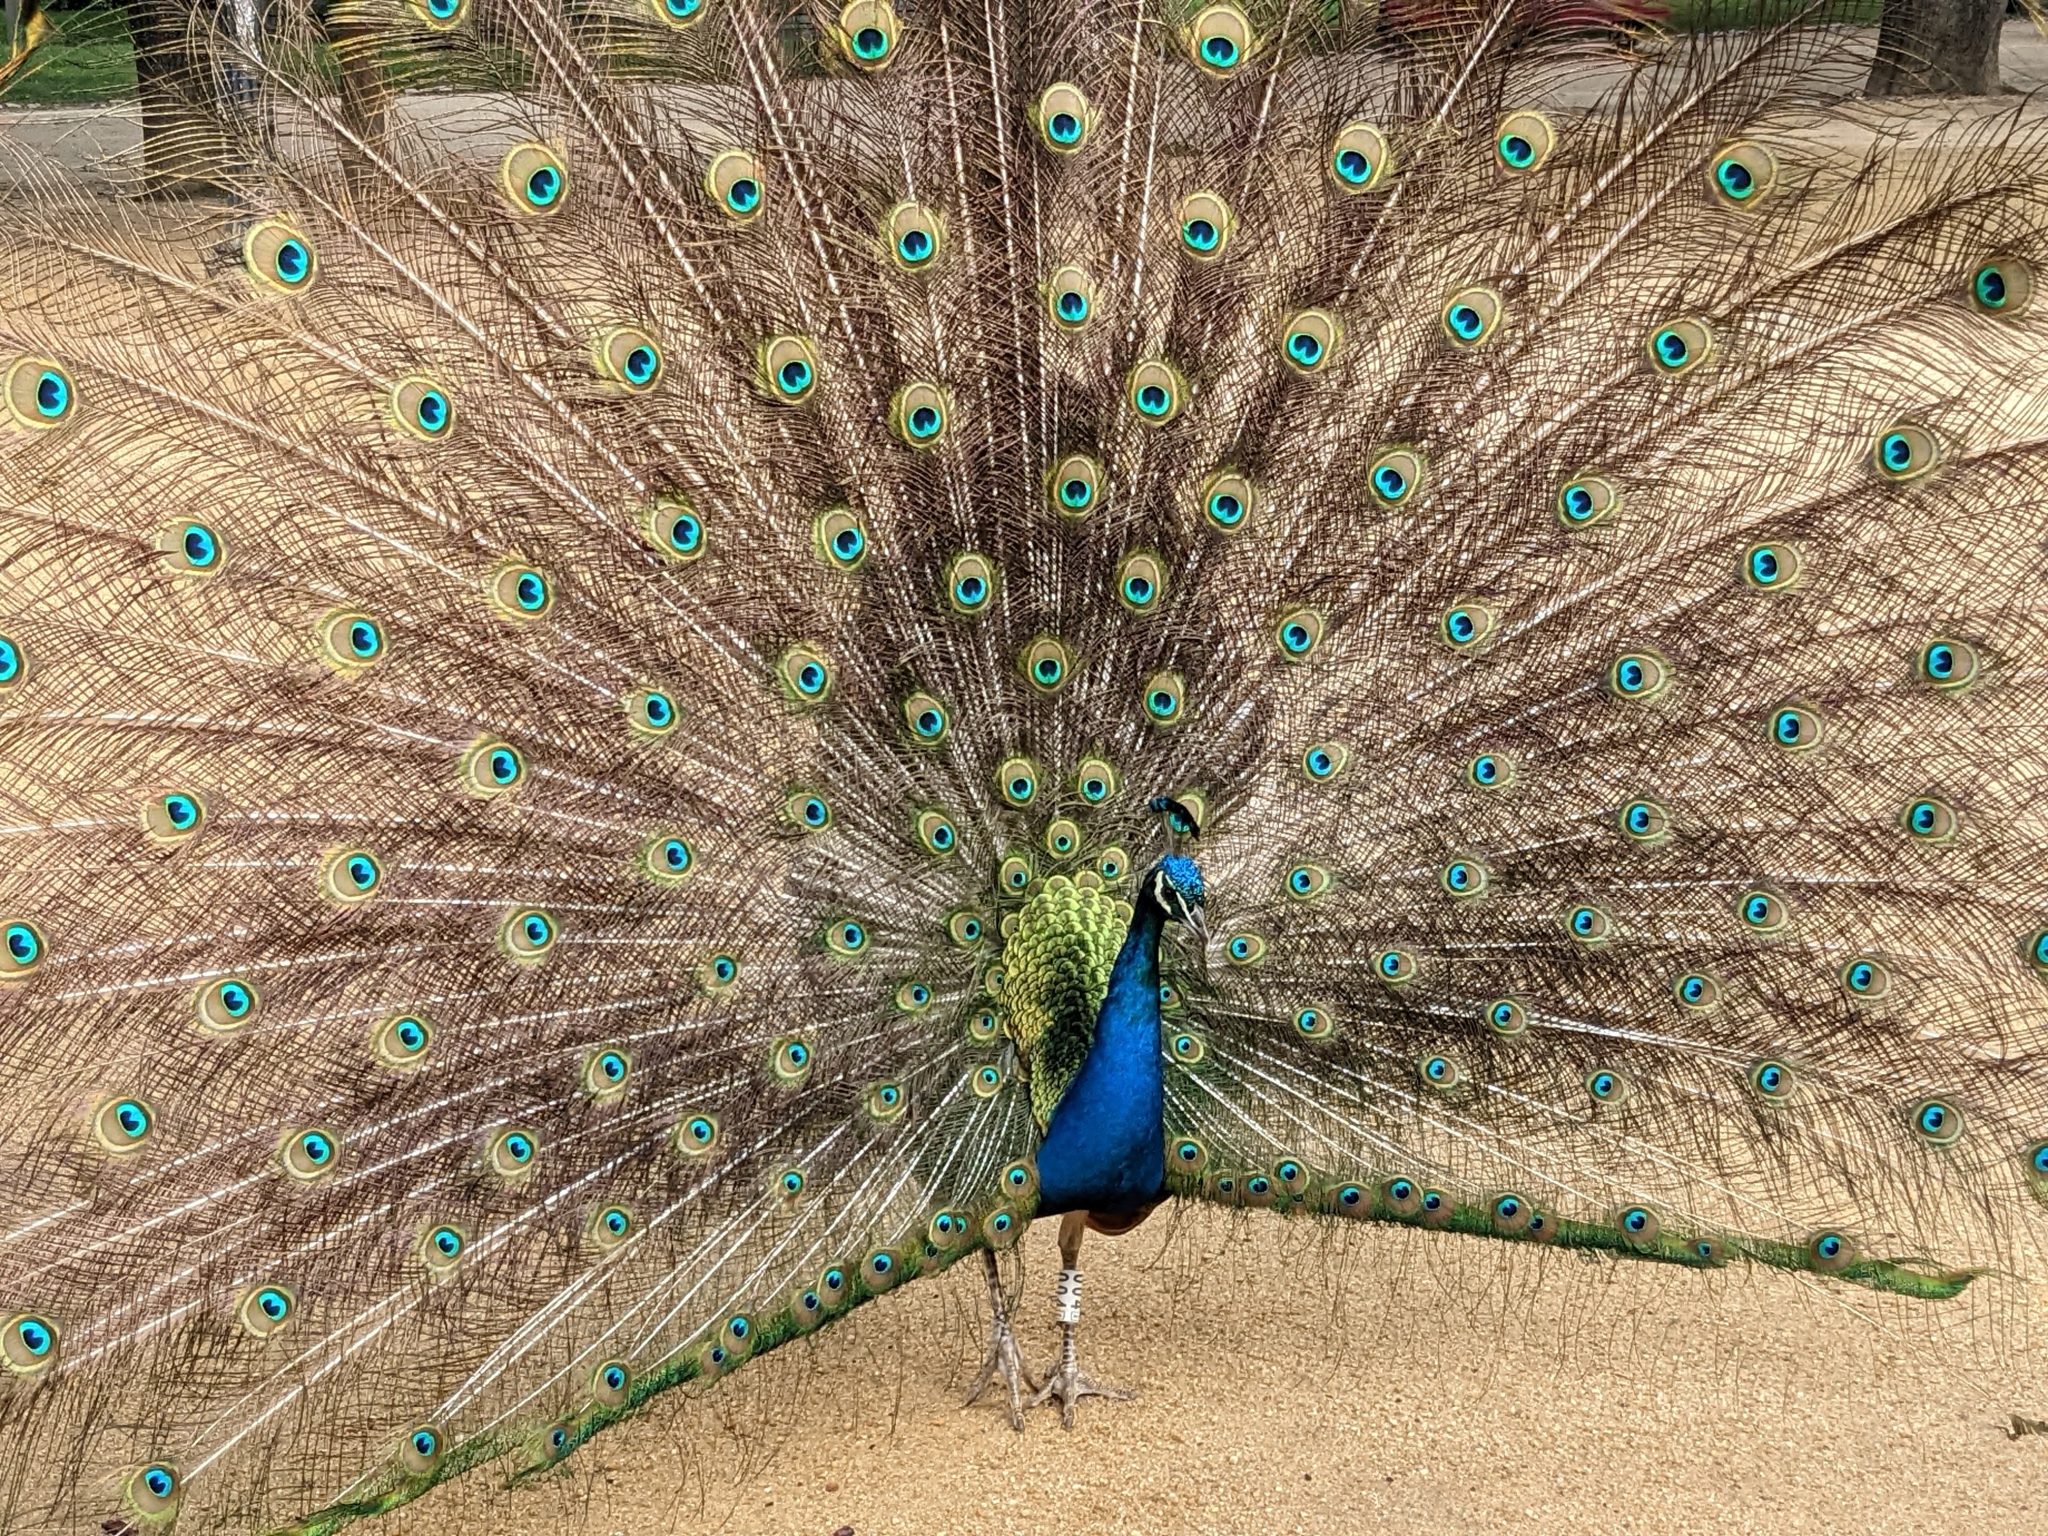 Peacock train display. Tagged bird circling and train rattling in park.